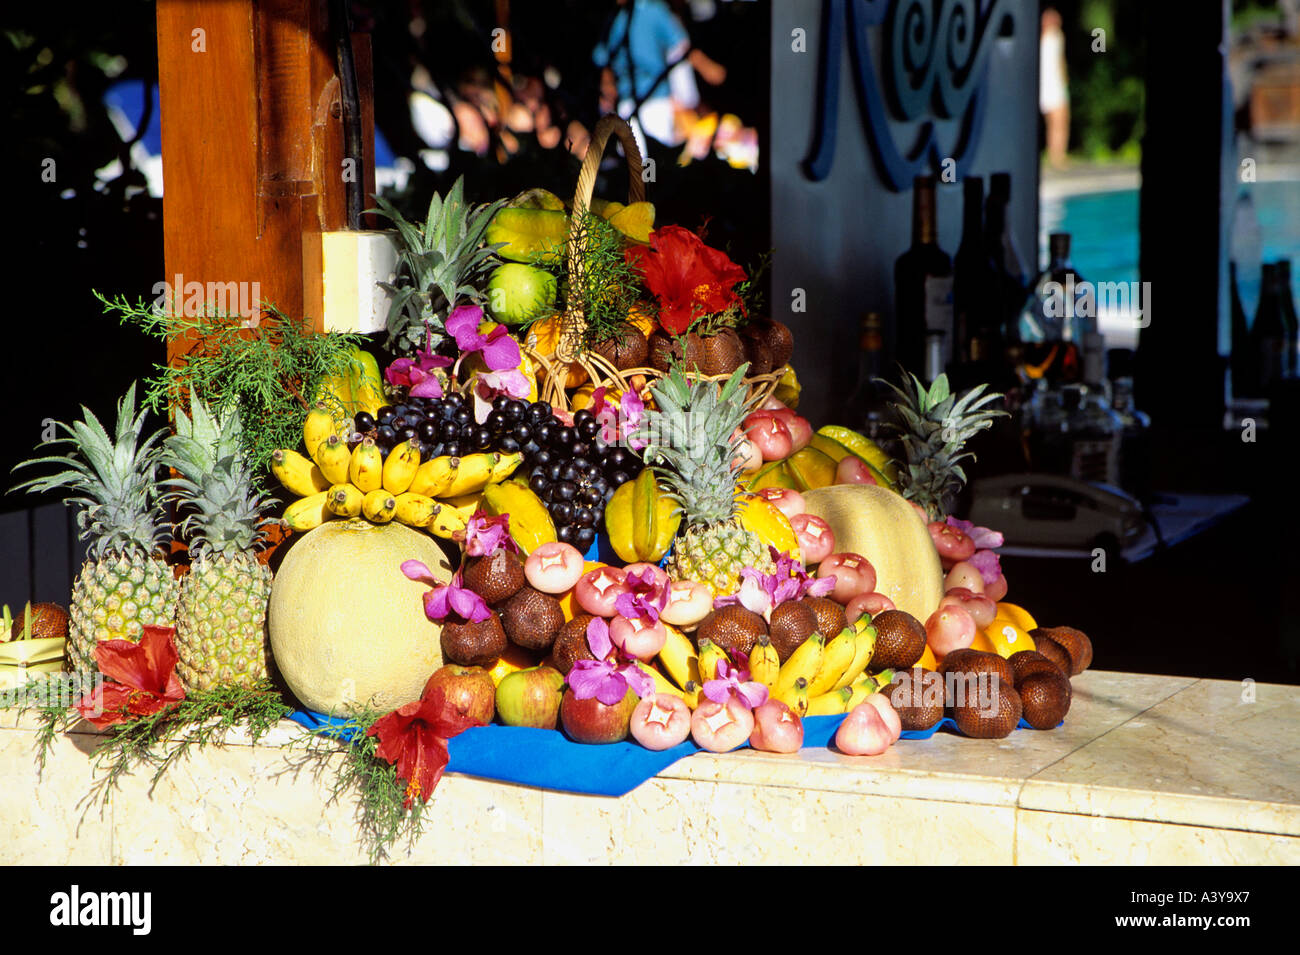 Arrangement Of Tropical Fruits Dininghall Of Hotel Island Of Bali Stock Photo Alamy